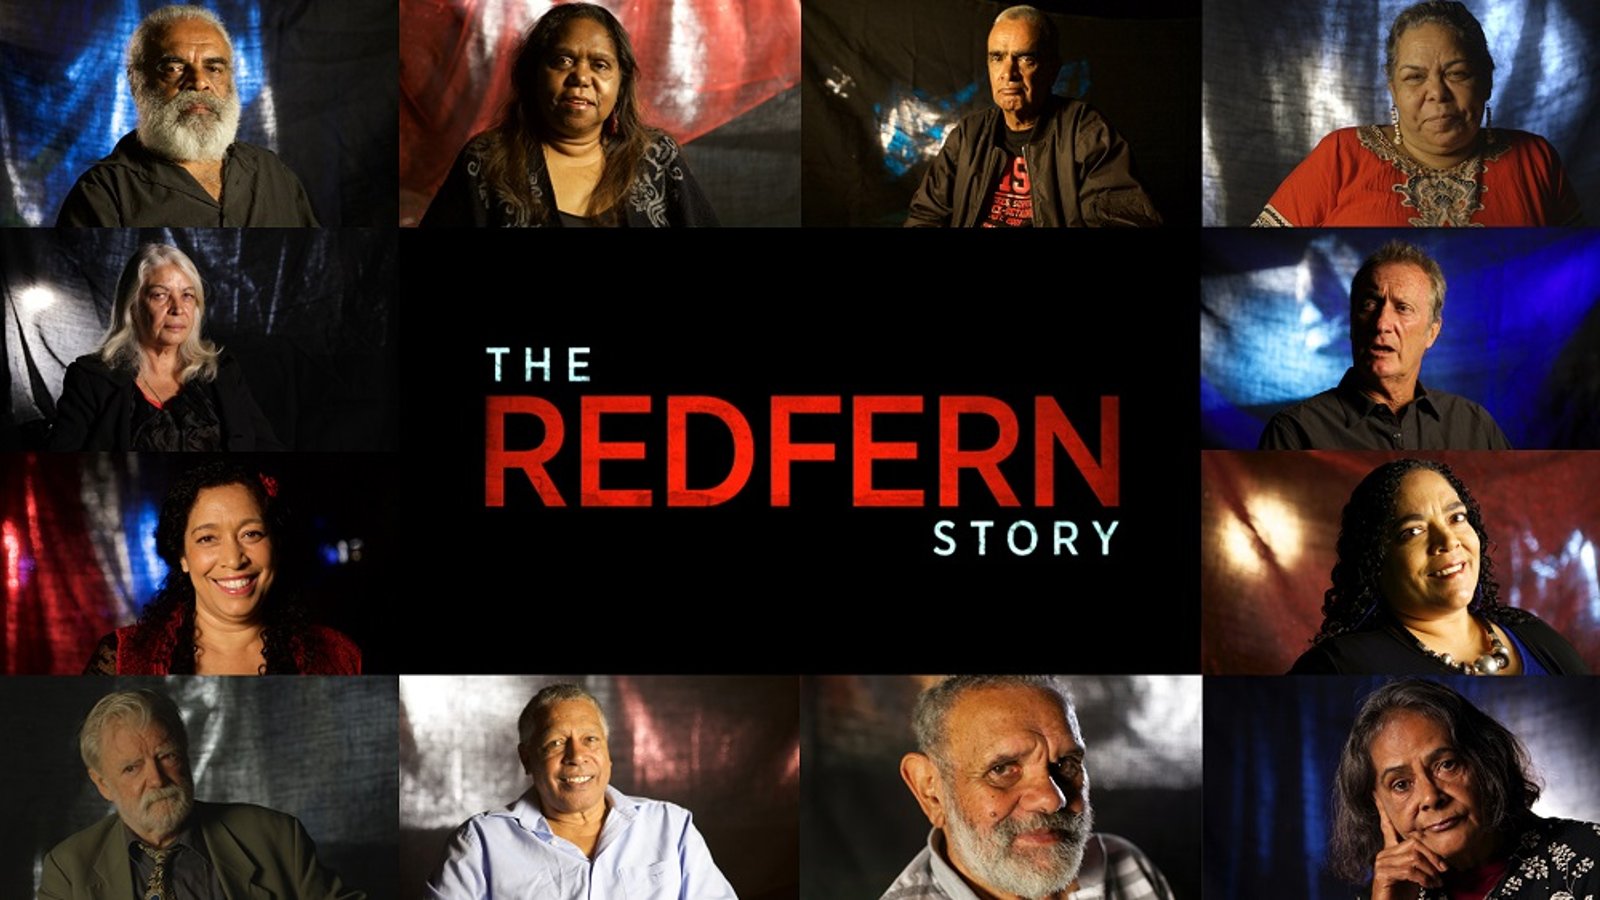 The Redfern Story - Fighting for Indigenous Rights Through Theater